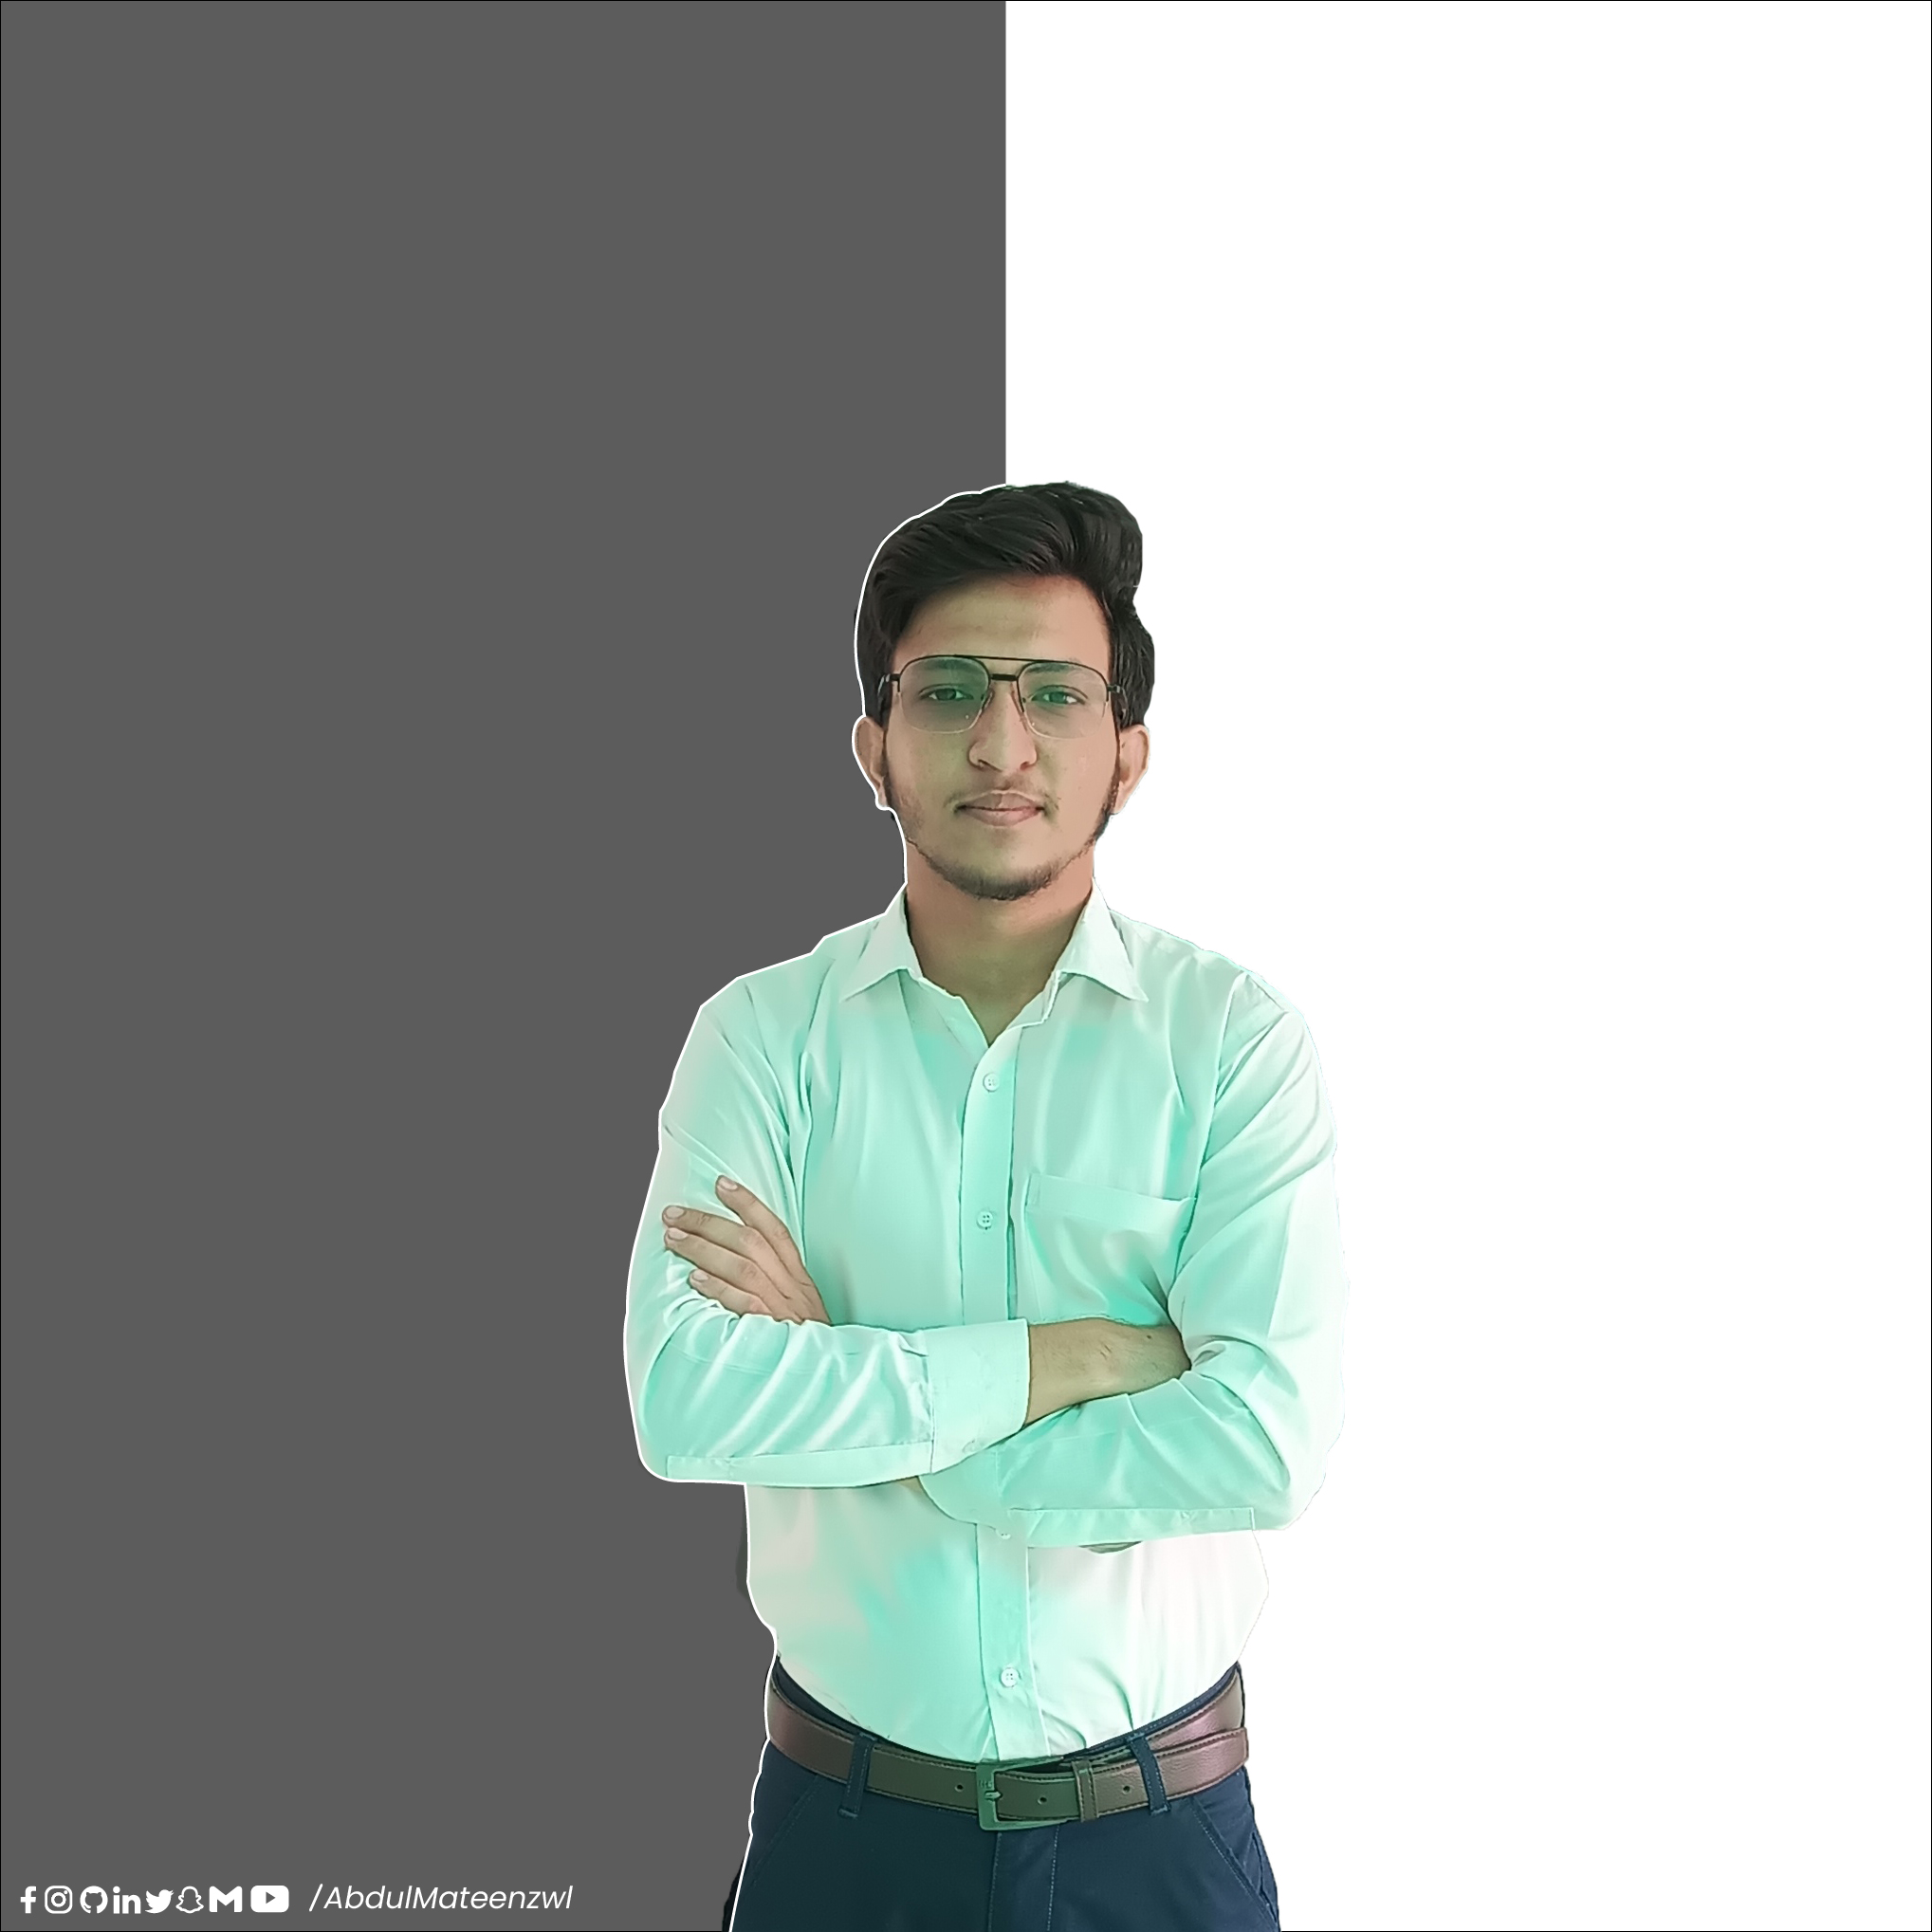 Abdul Mateen's Picture with a black and white background